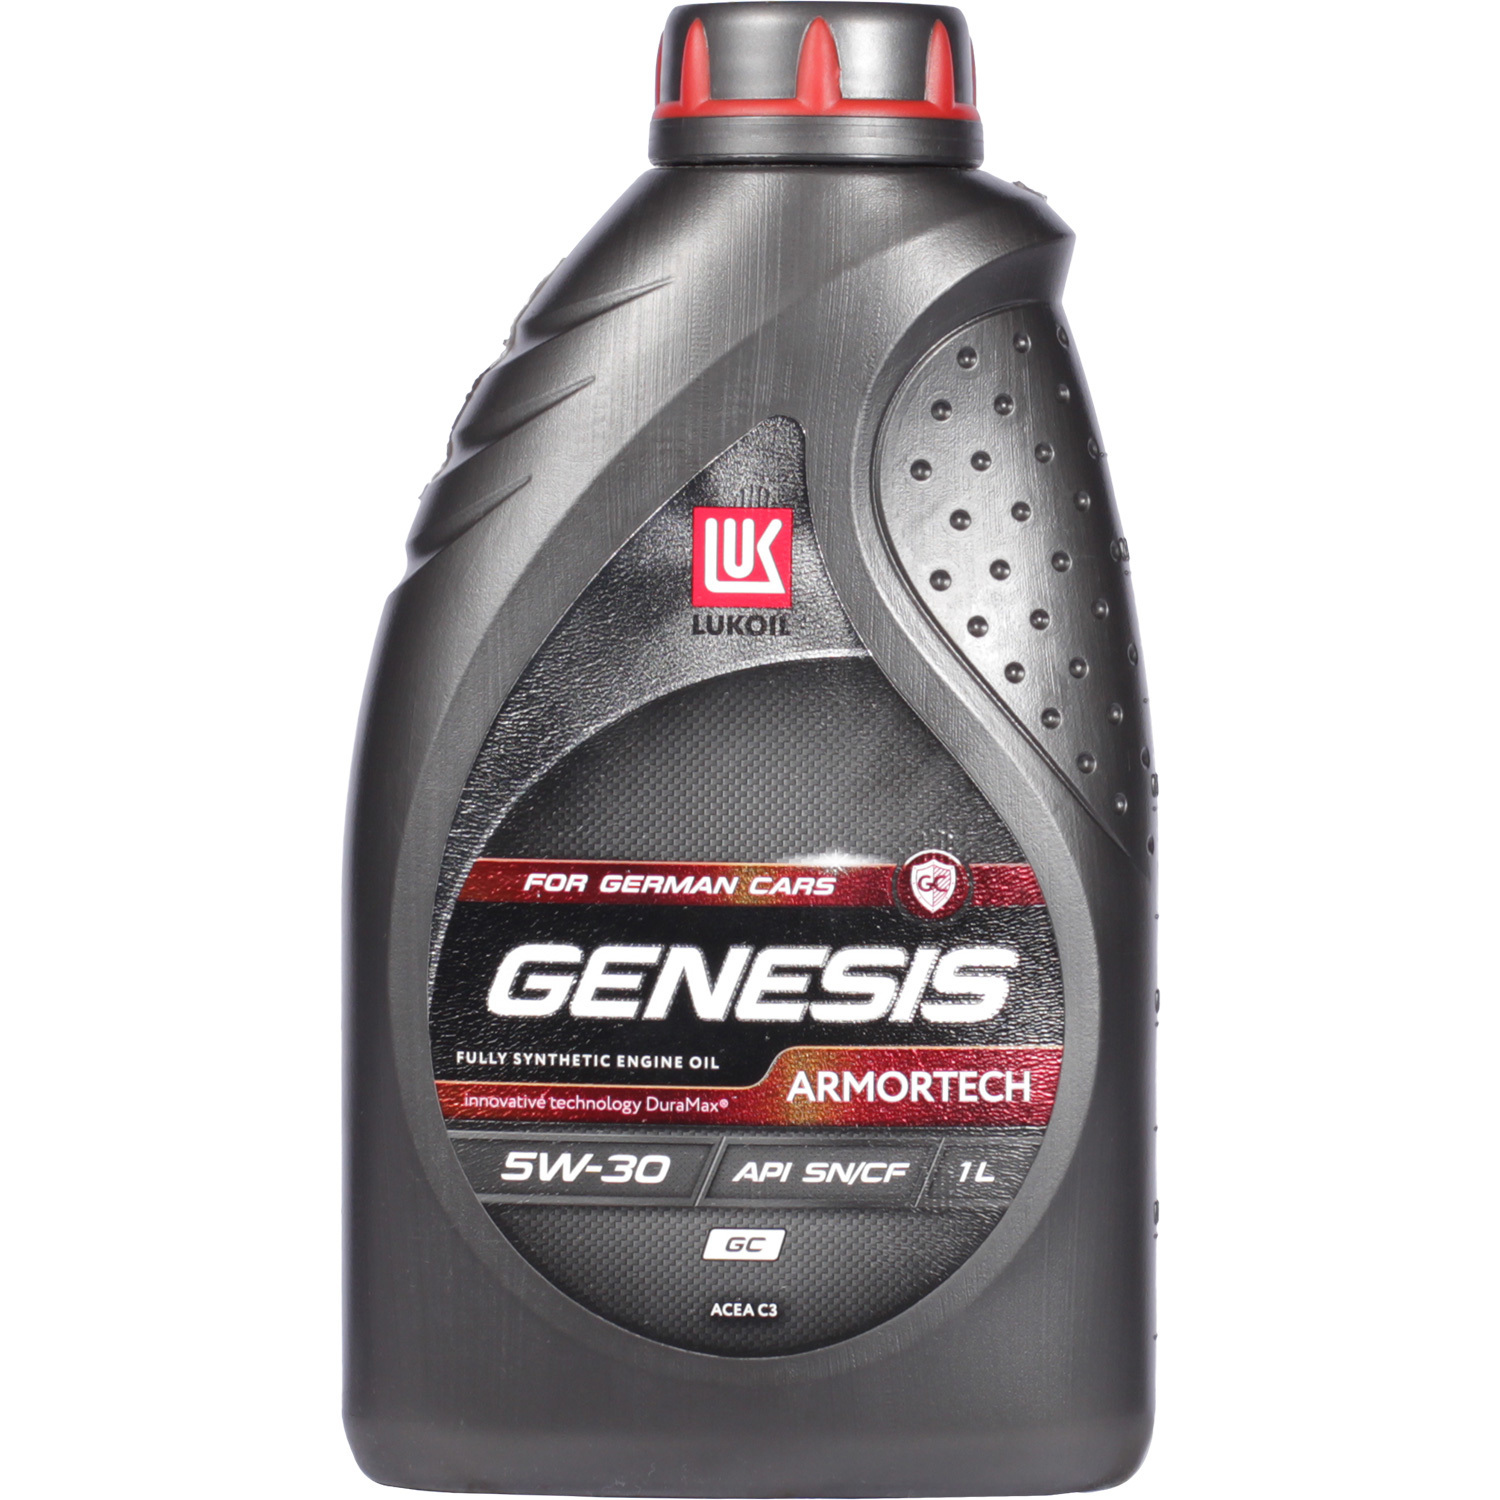 Lukoil Моторное масло Lukoil Genesis Armortech GC 5W-30, 1 л моторное масло lukoil genesis armortech fd 5w 30 1л синтетическое [3149867]